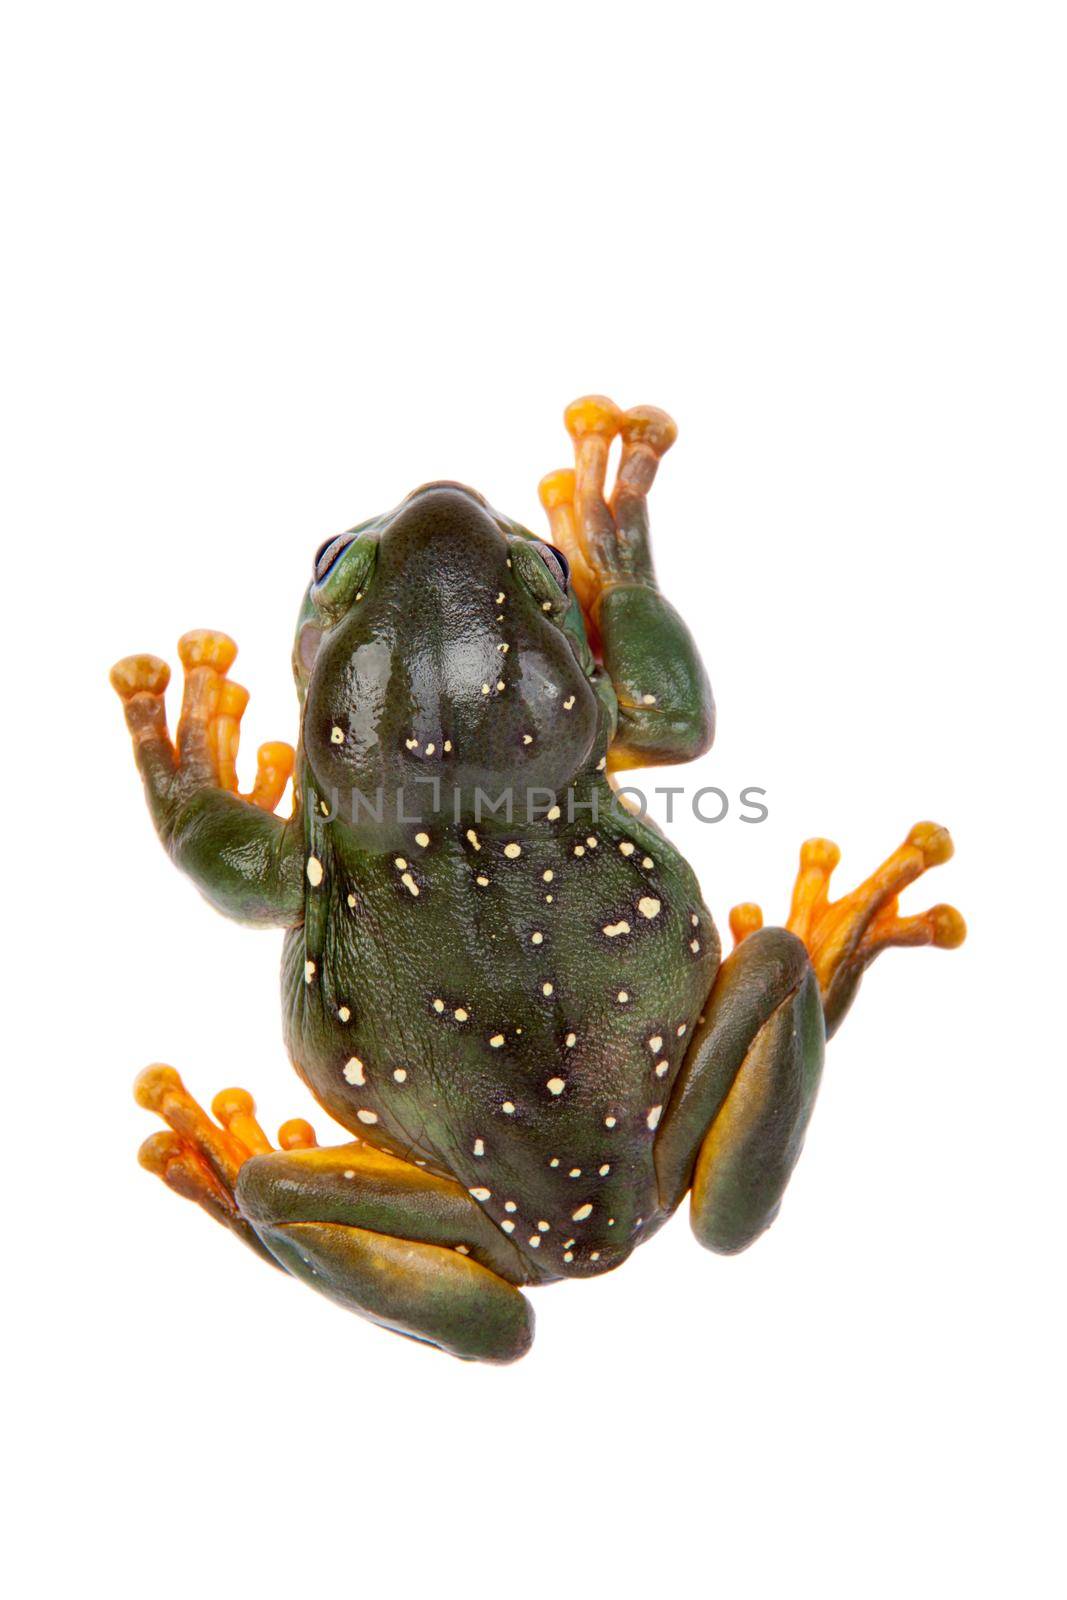 The magnificent tree frog, Ranoidea splendida, also known as the splendid tree frog on white background